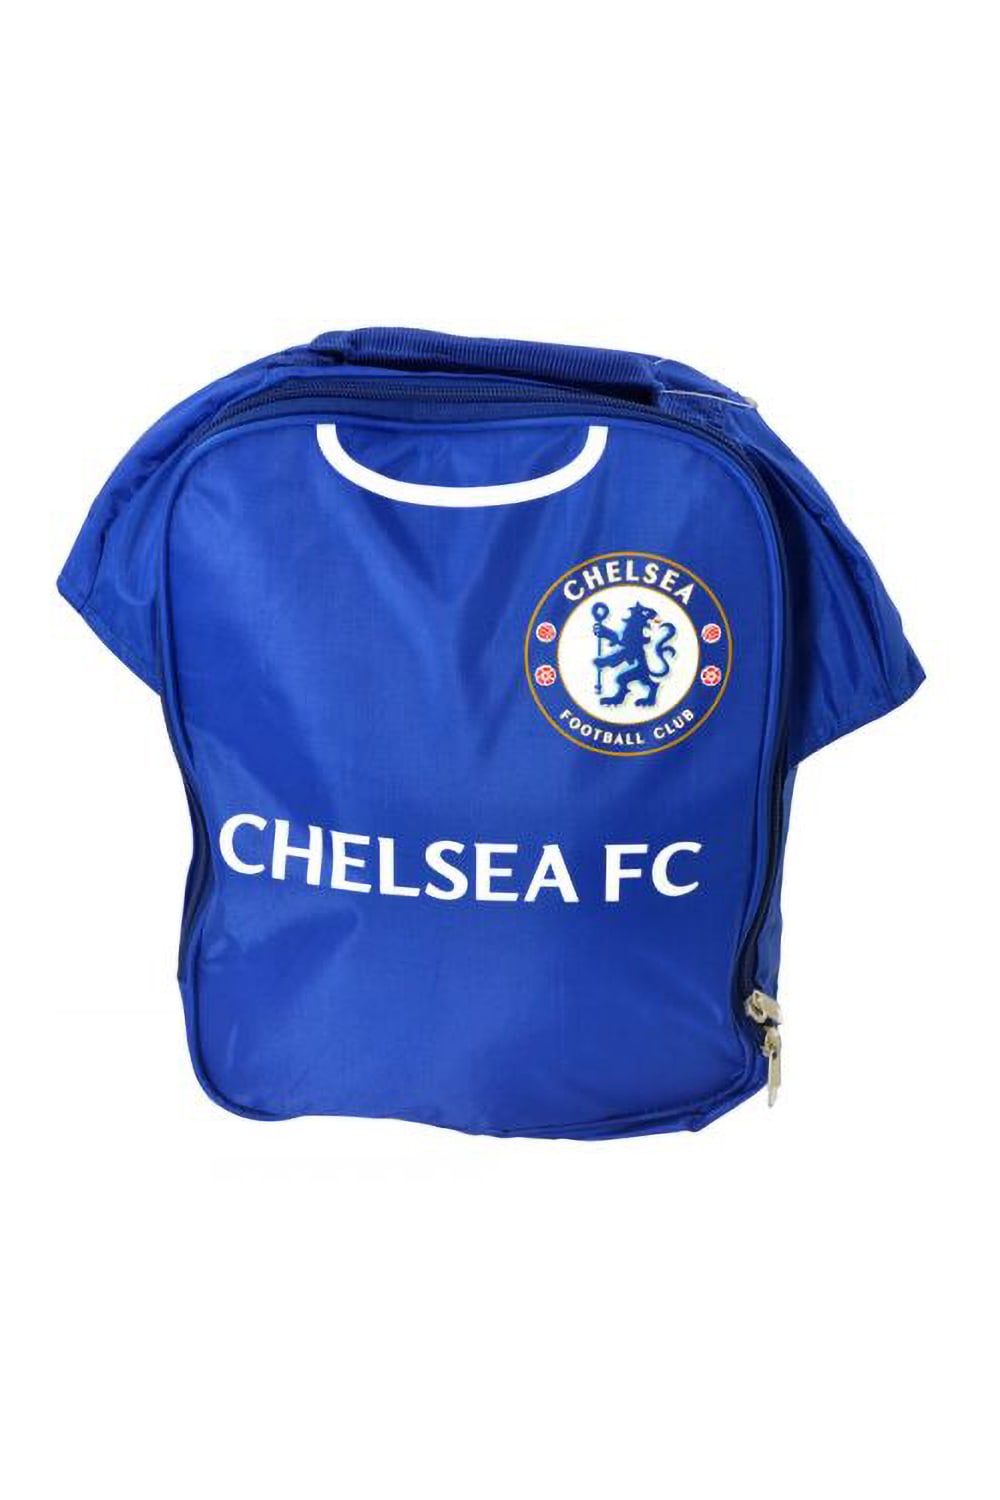 Official Soccer Kit Lunch Bag - One Size